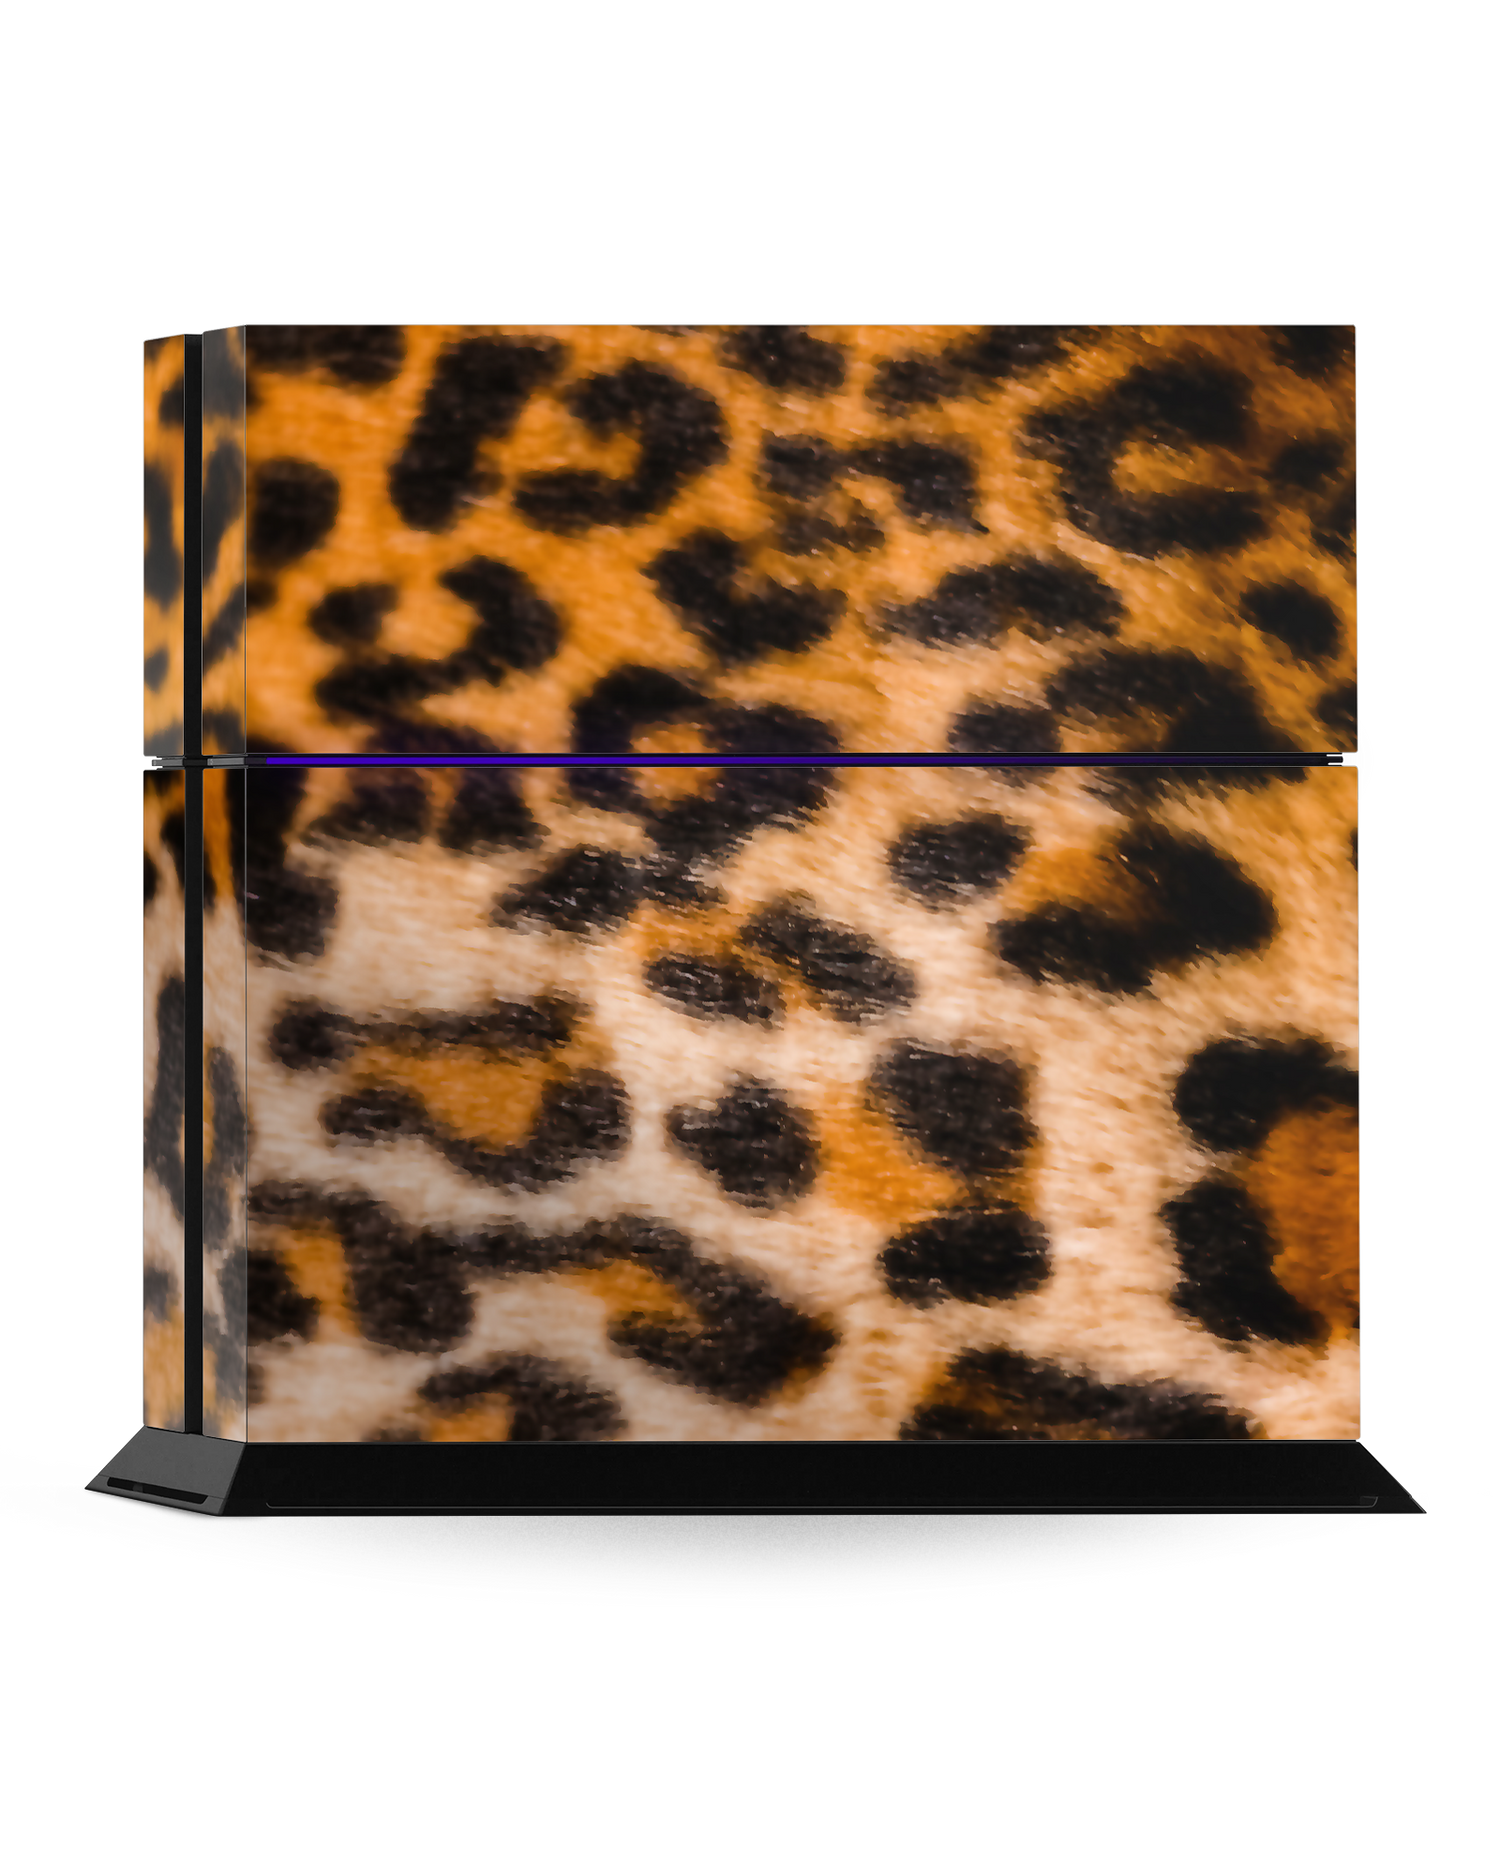 Leopard Pattern Console Skin for Sony PlayStation 4: Standing